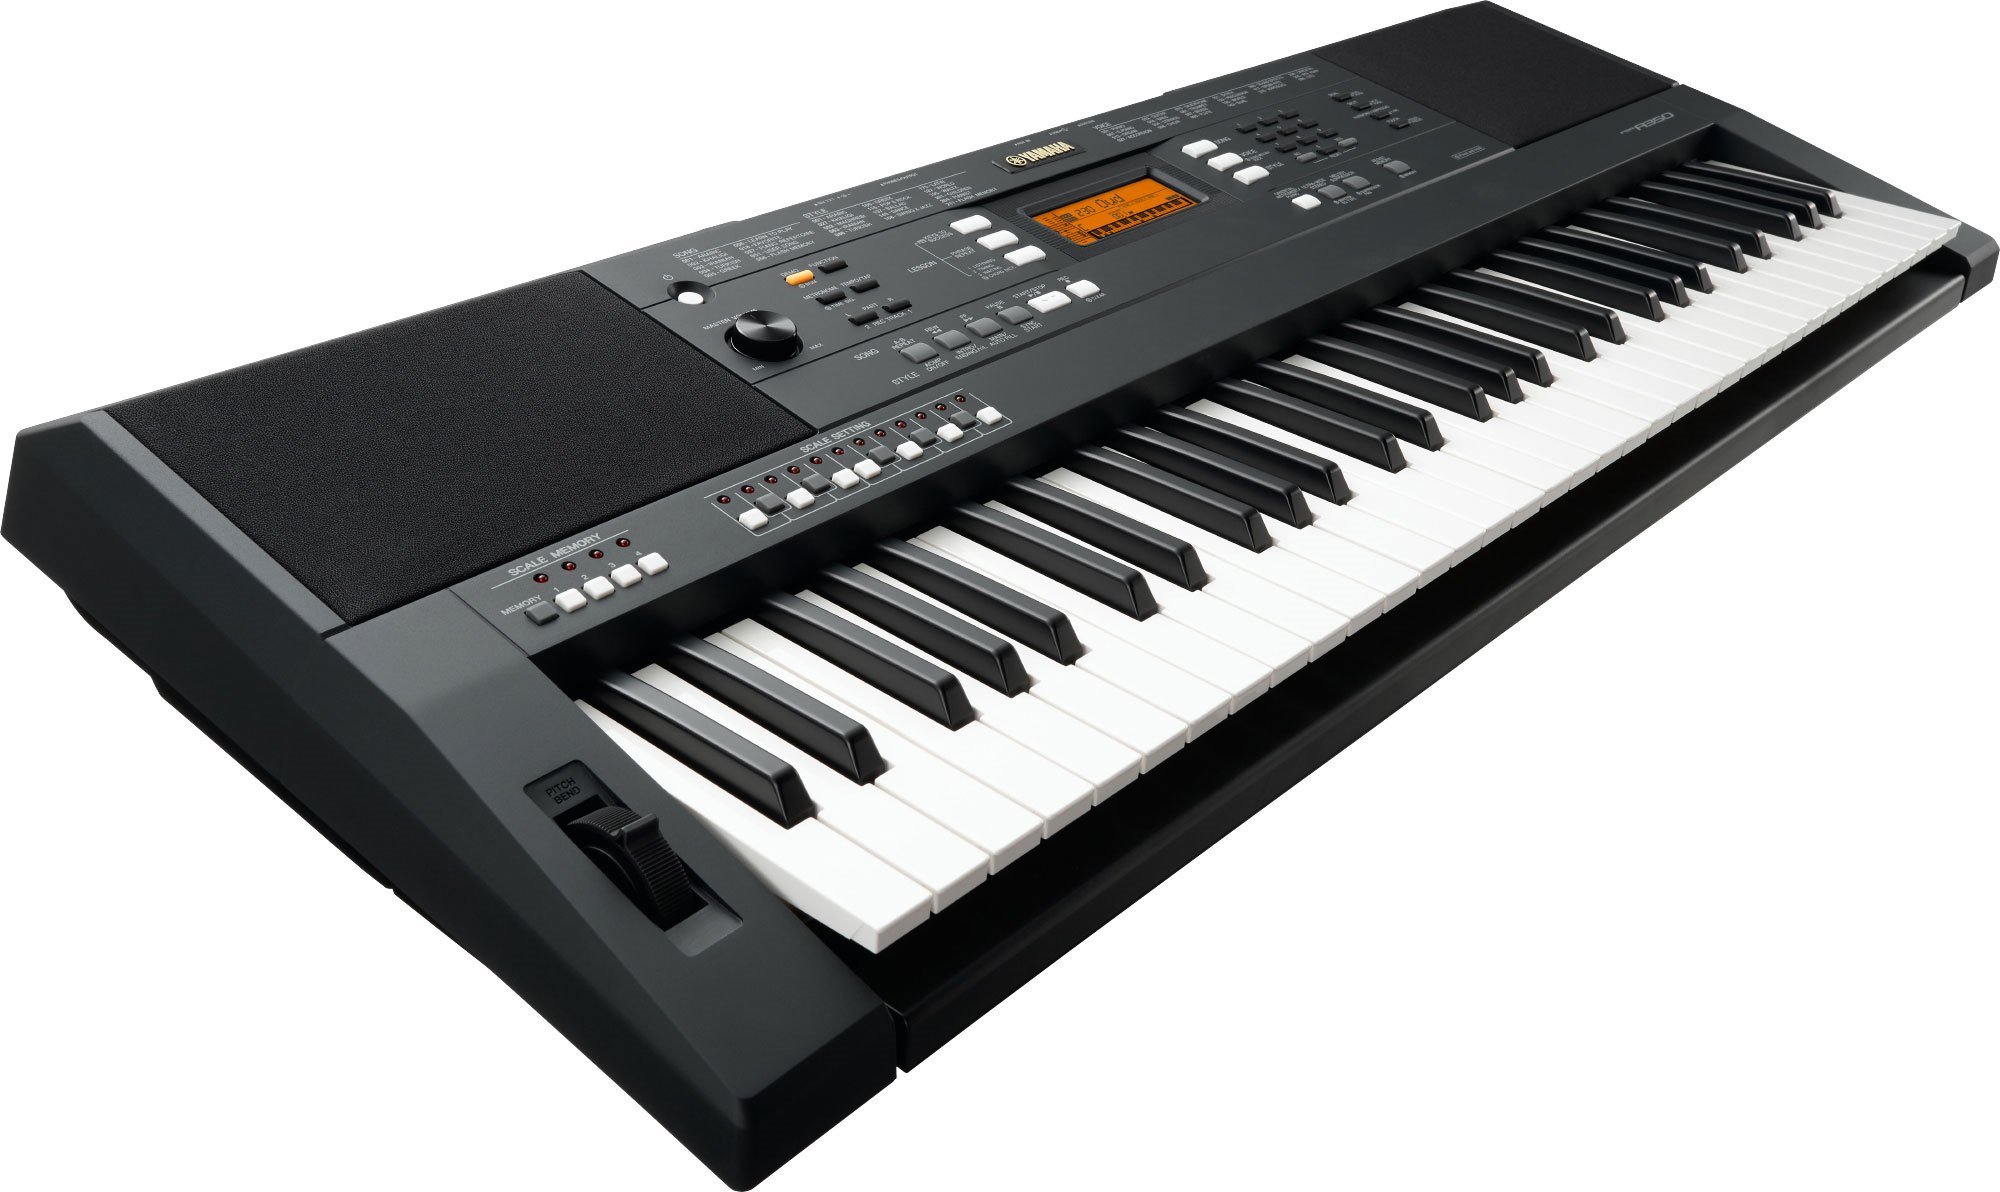 PSR-A350 - Overview - Portable Keyboards - Keyboard Instruments 